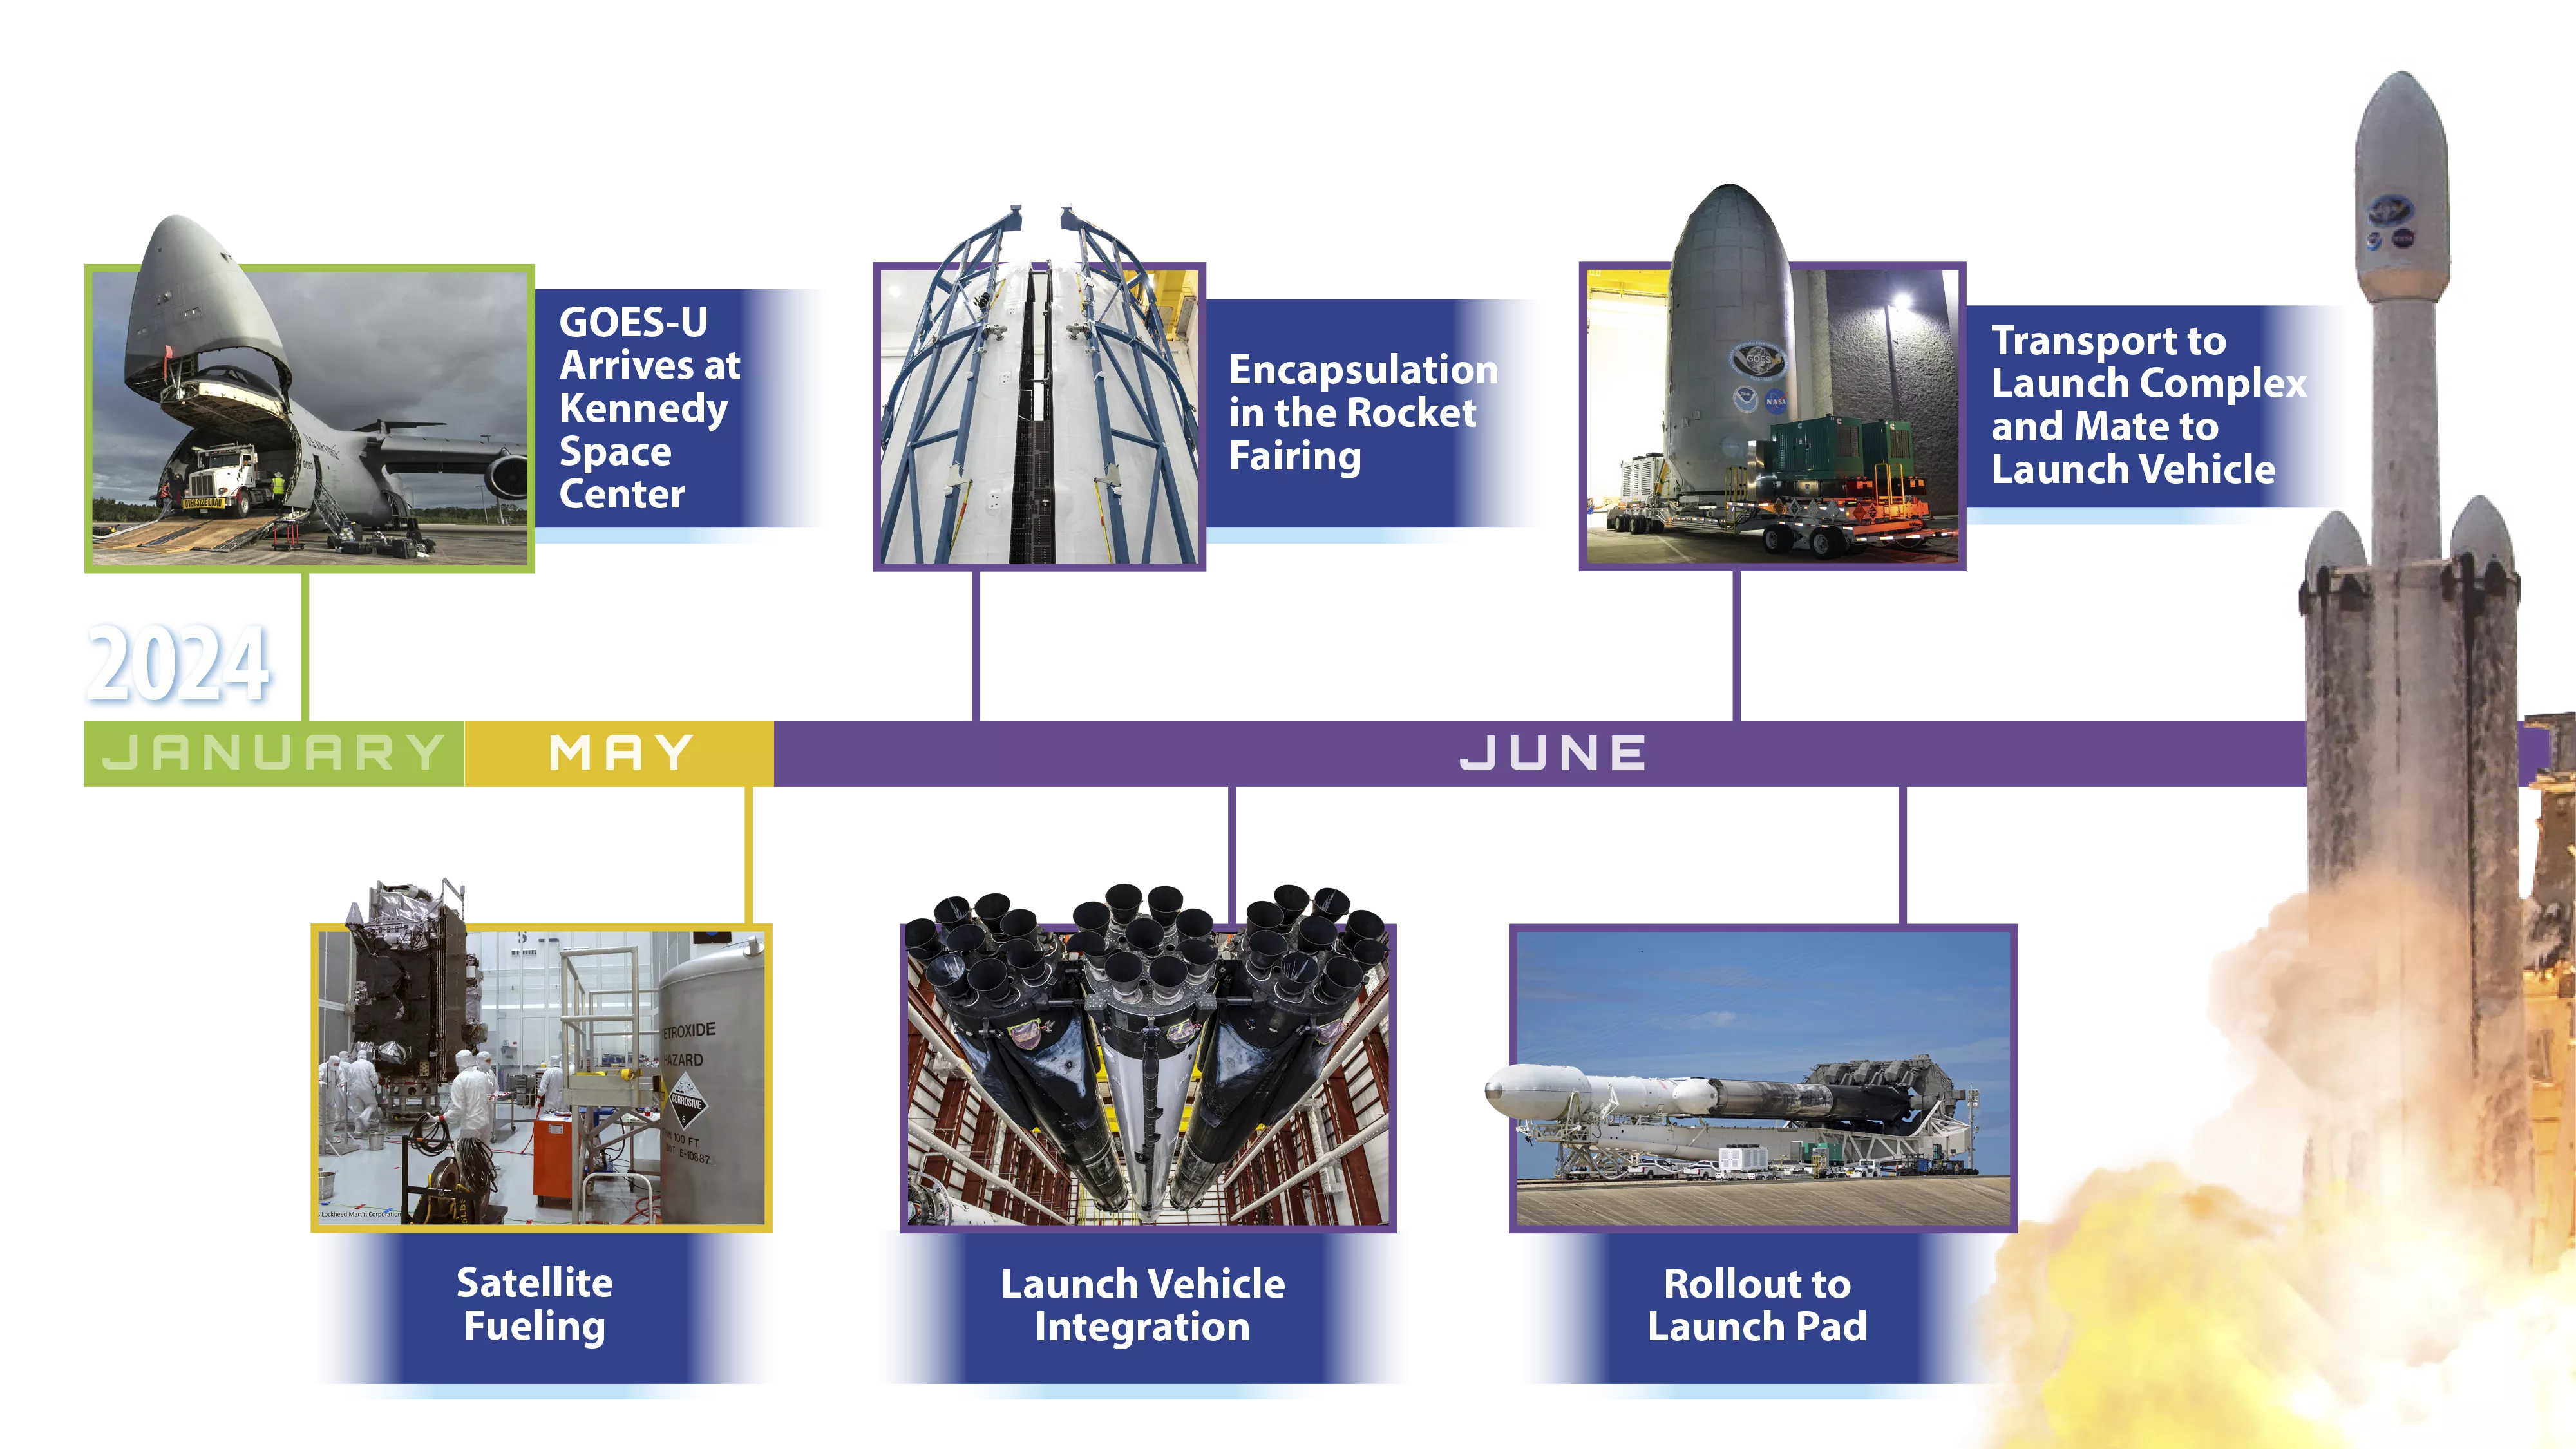 Image of the GOES-U and SpaceX shuttle; timeline of events before the rocket launch.